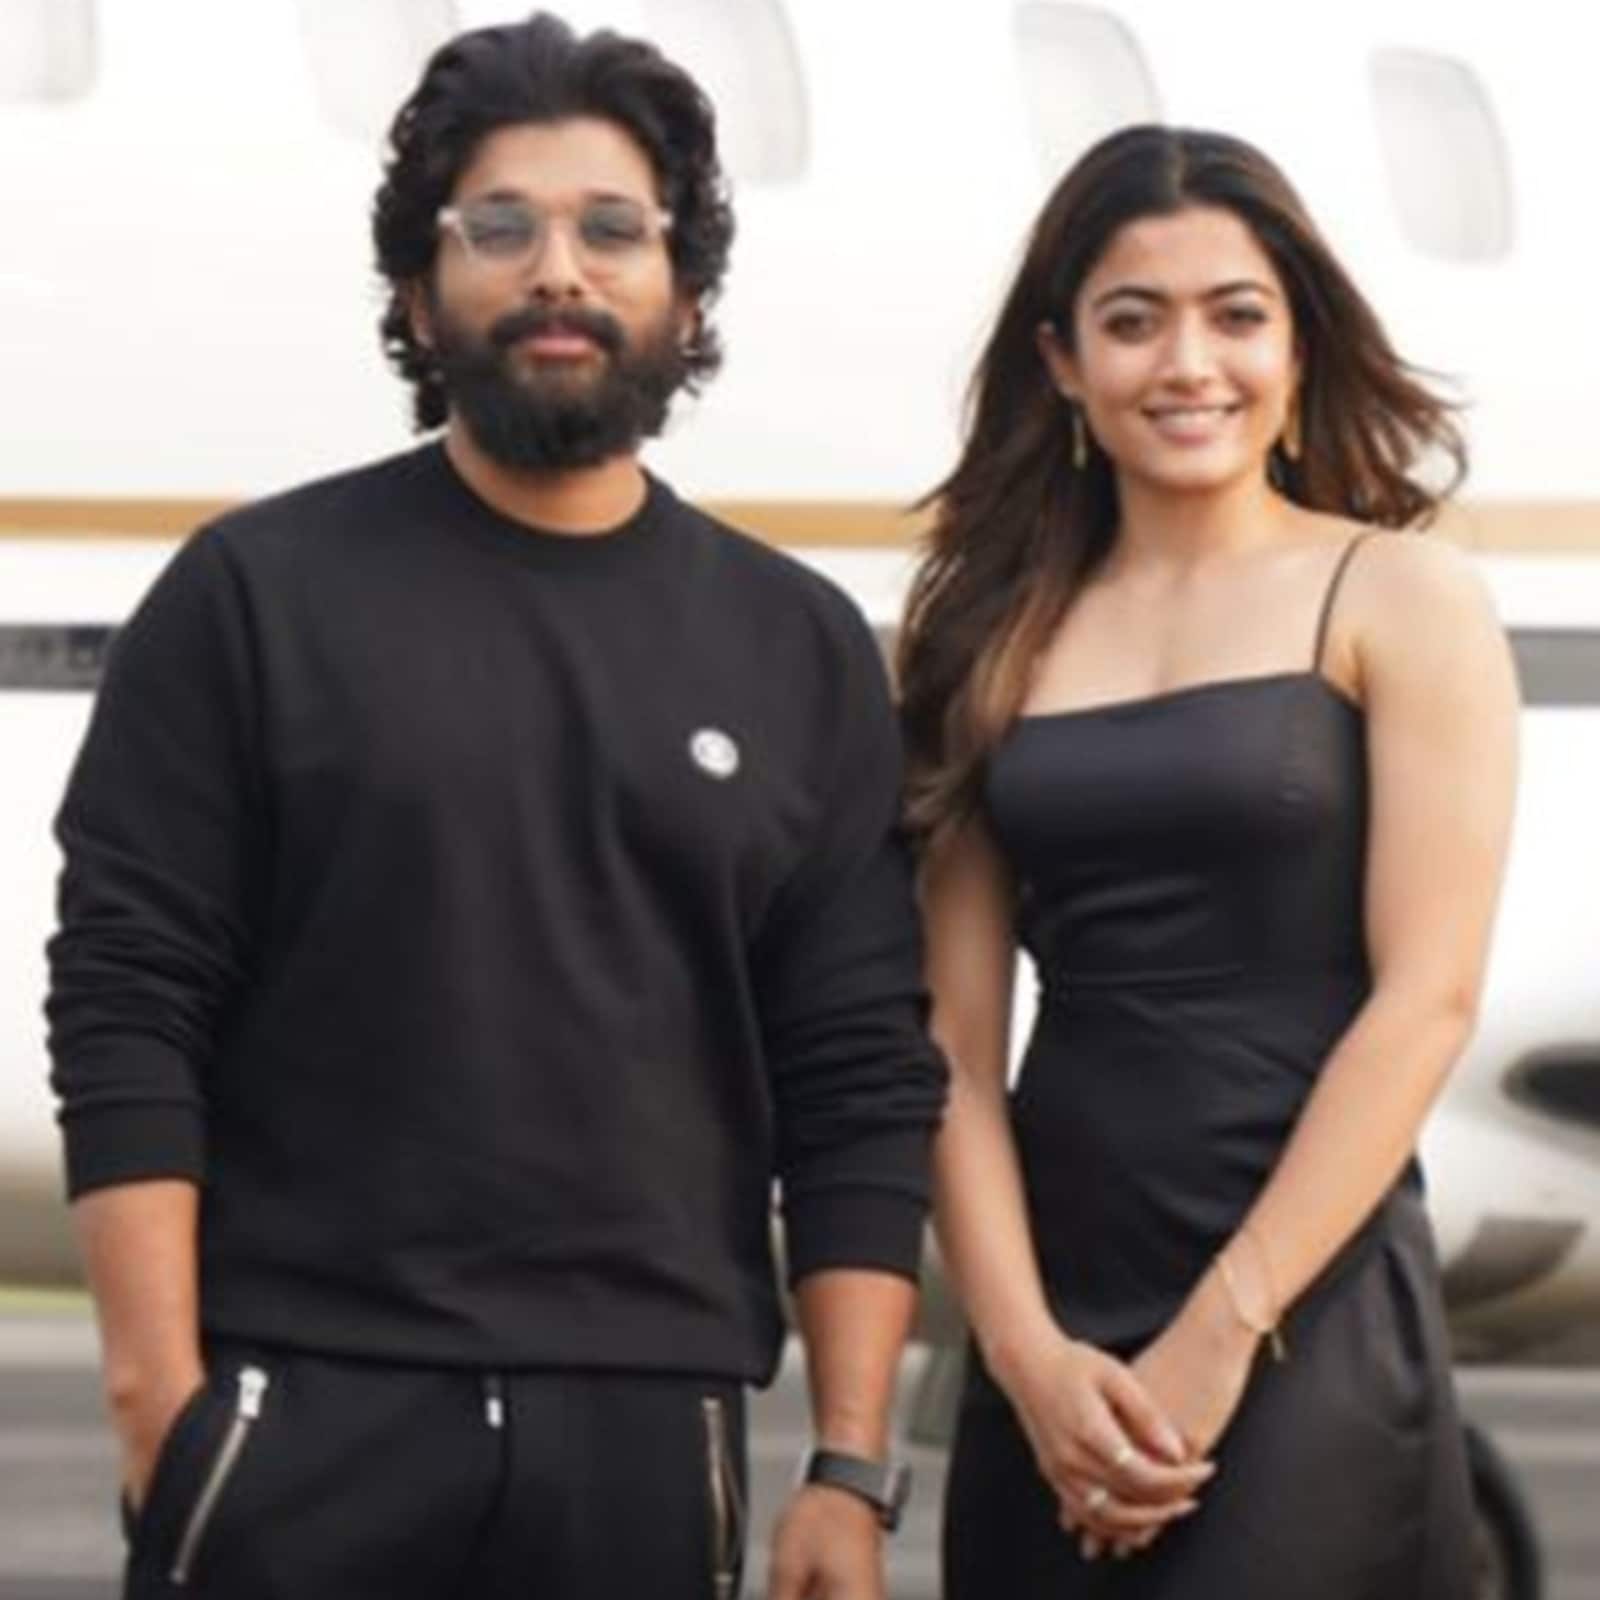 Allu Arjun Reacts After Reporter Slams Him For Arriving Late to 'Pushpa' Event: 'I Don't Want to...'